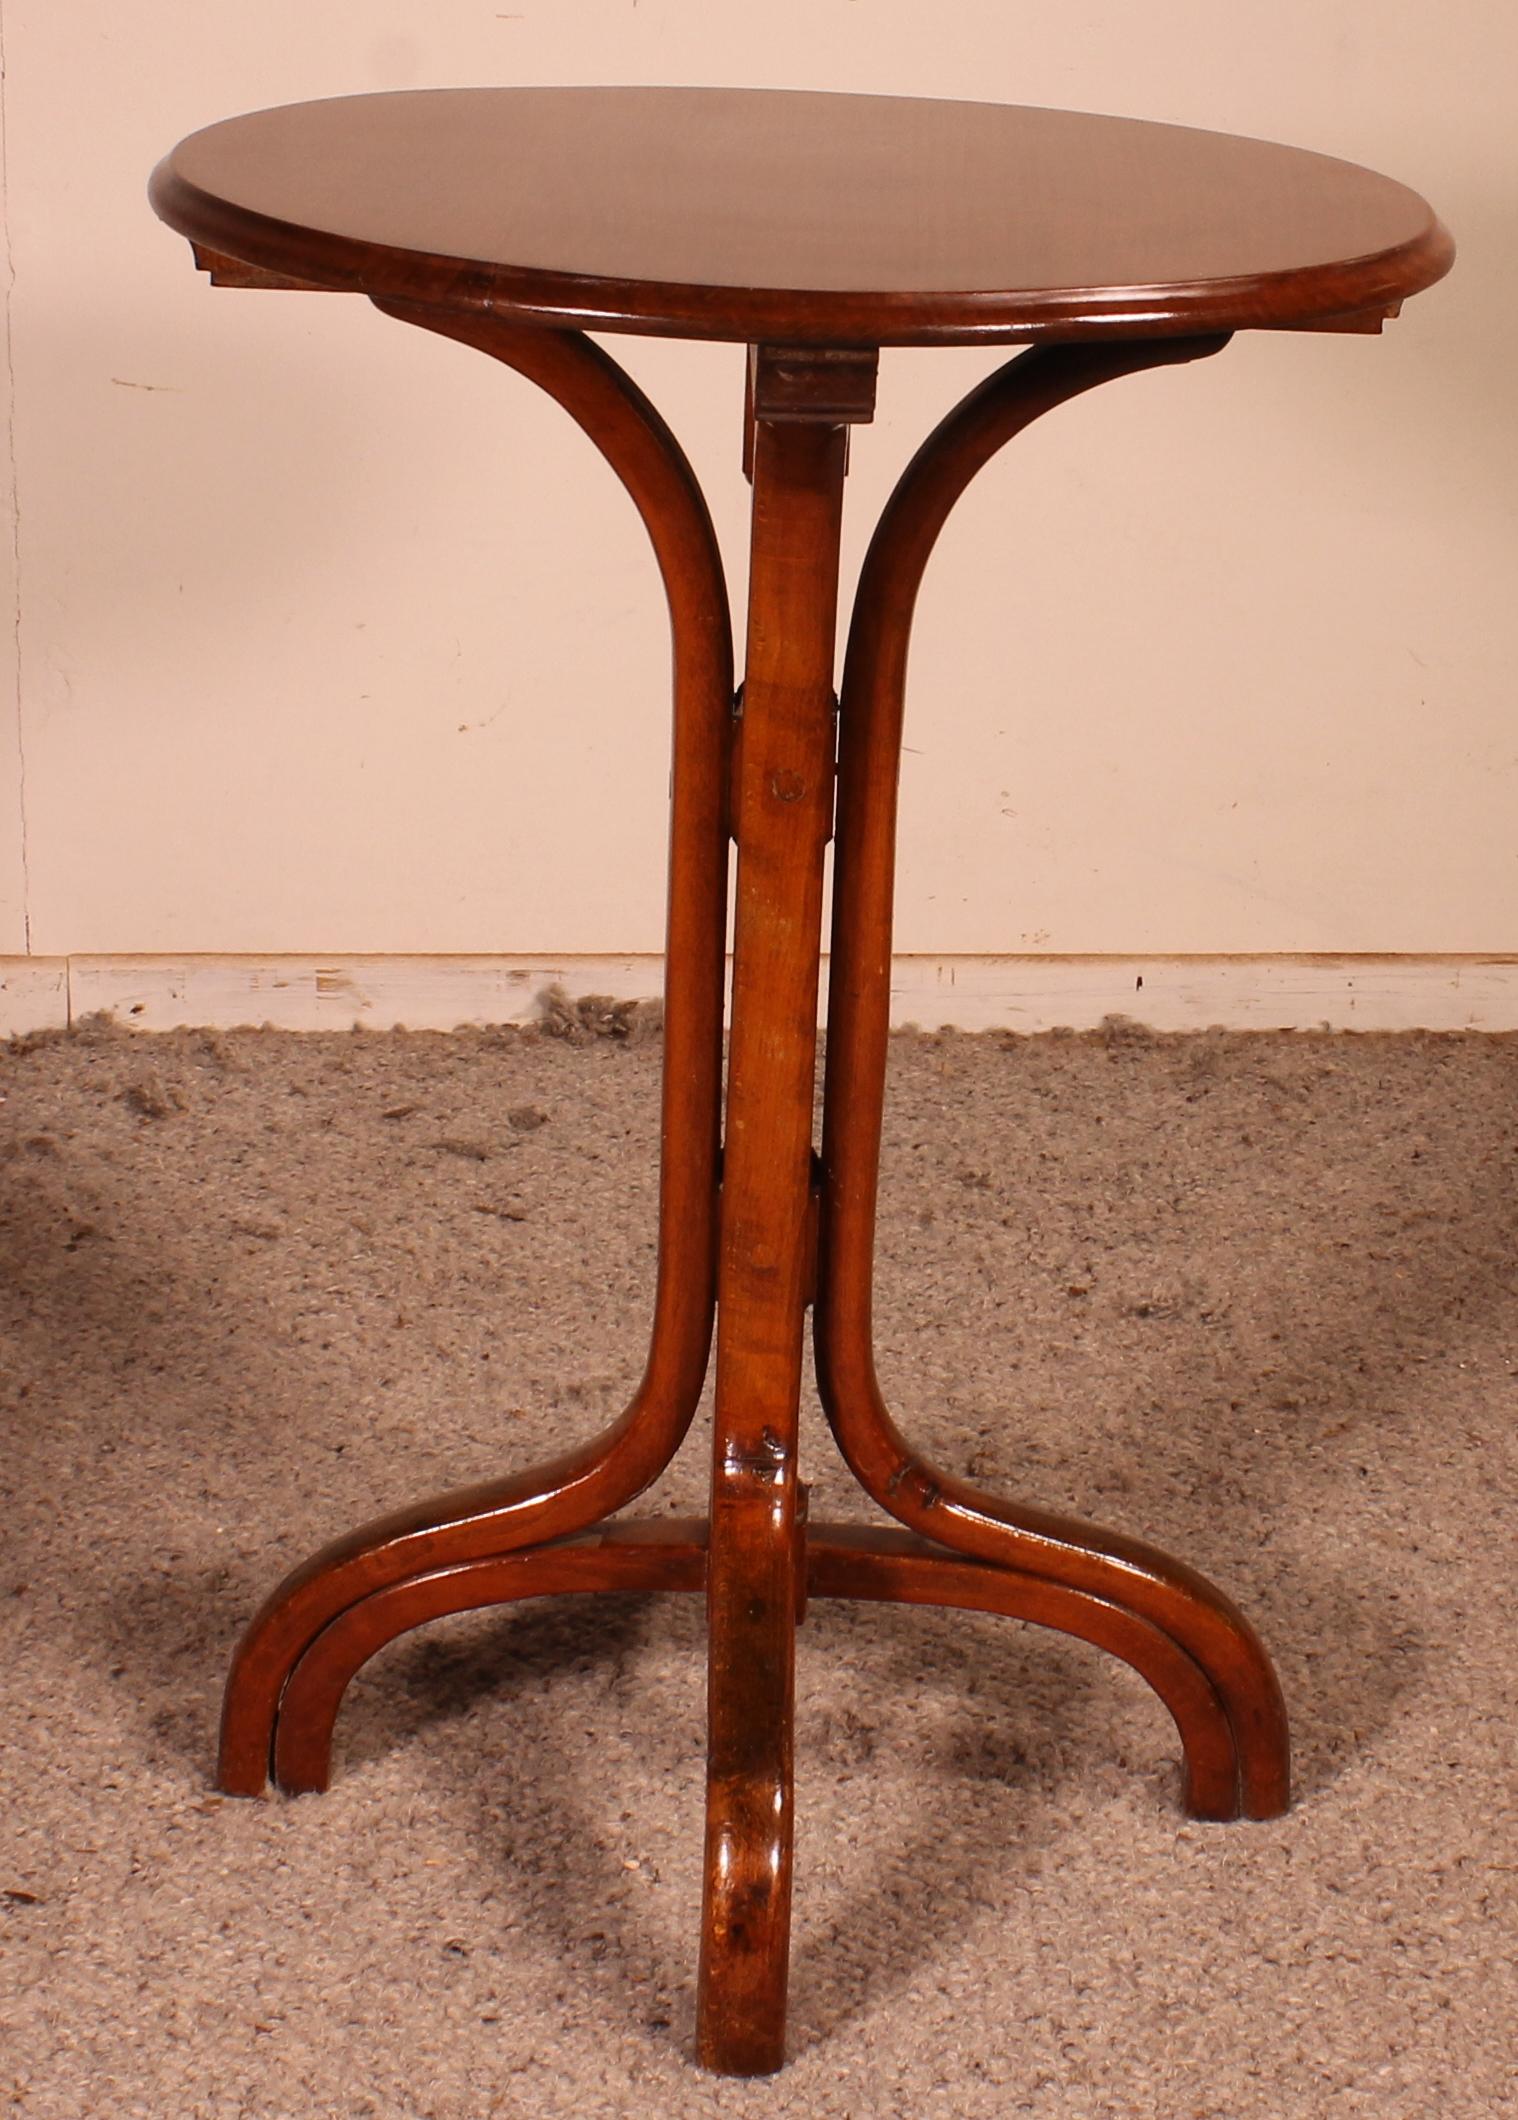 German Small Art Nouveau Pedestal Table, Early 20th Century